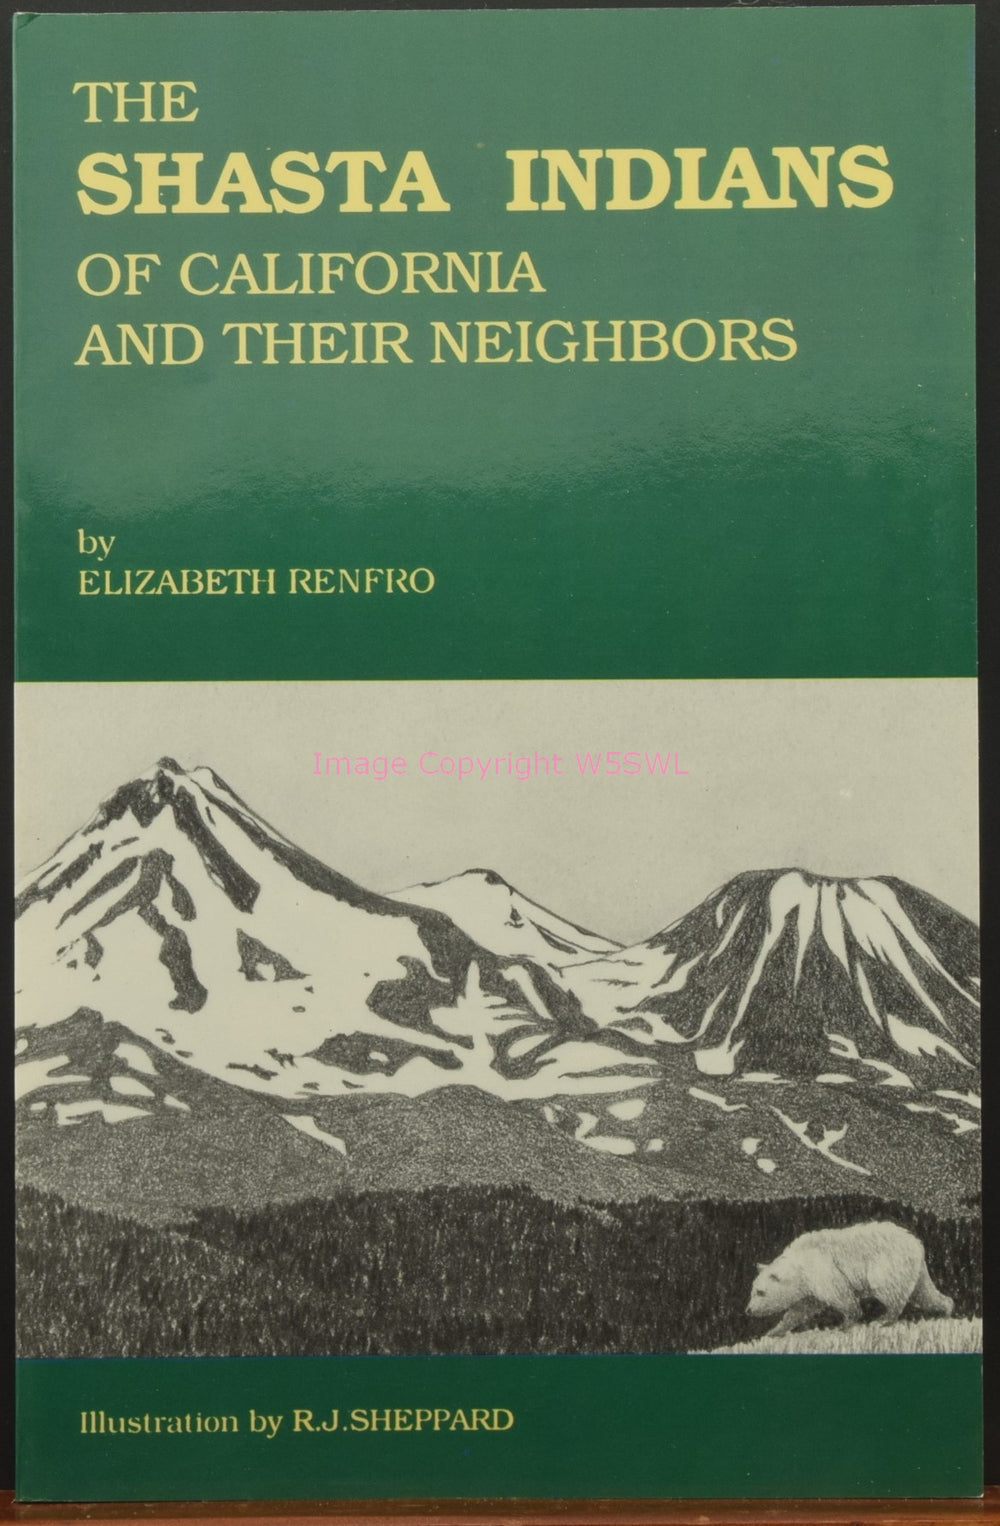 The Shasta Indians Of California and Their Neighbors by Elizabeth Renfro 5th Ed - Dave's Hobby Shop by W5SWL